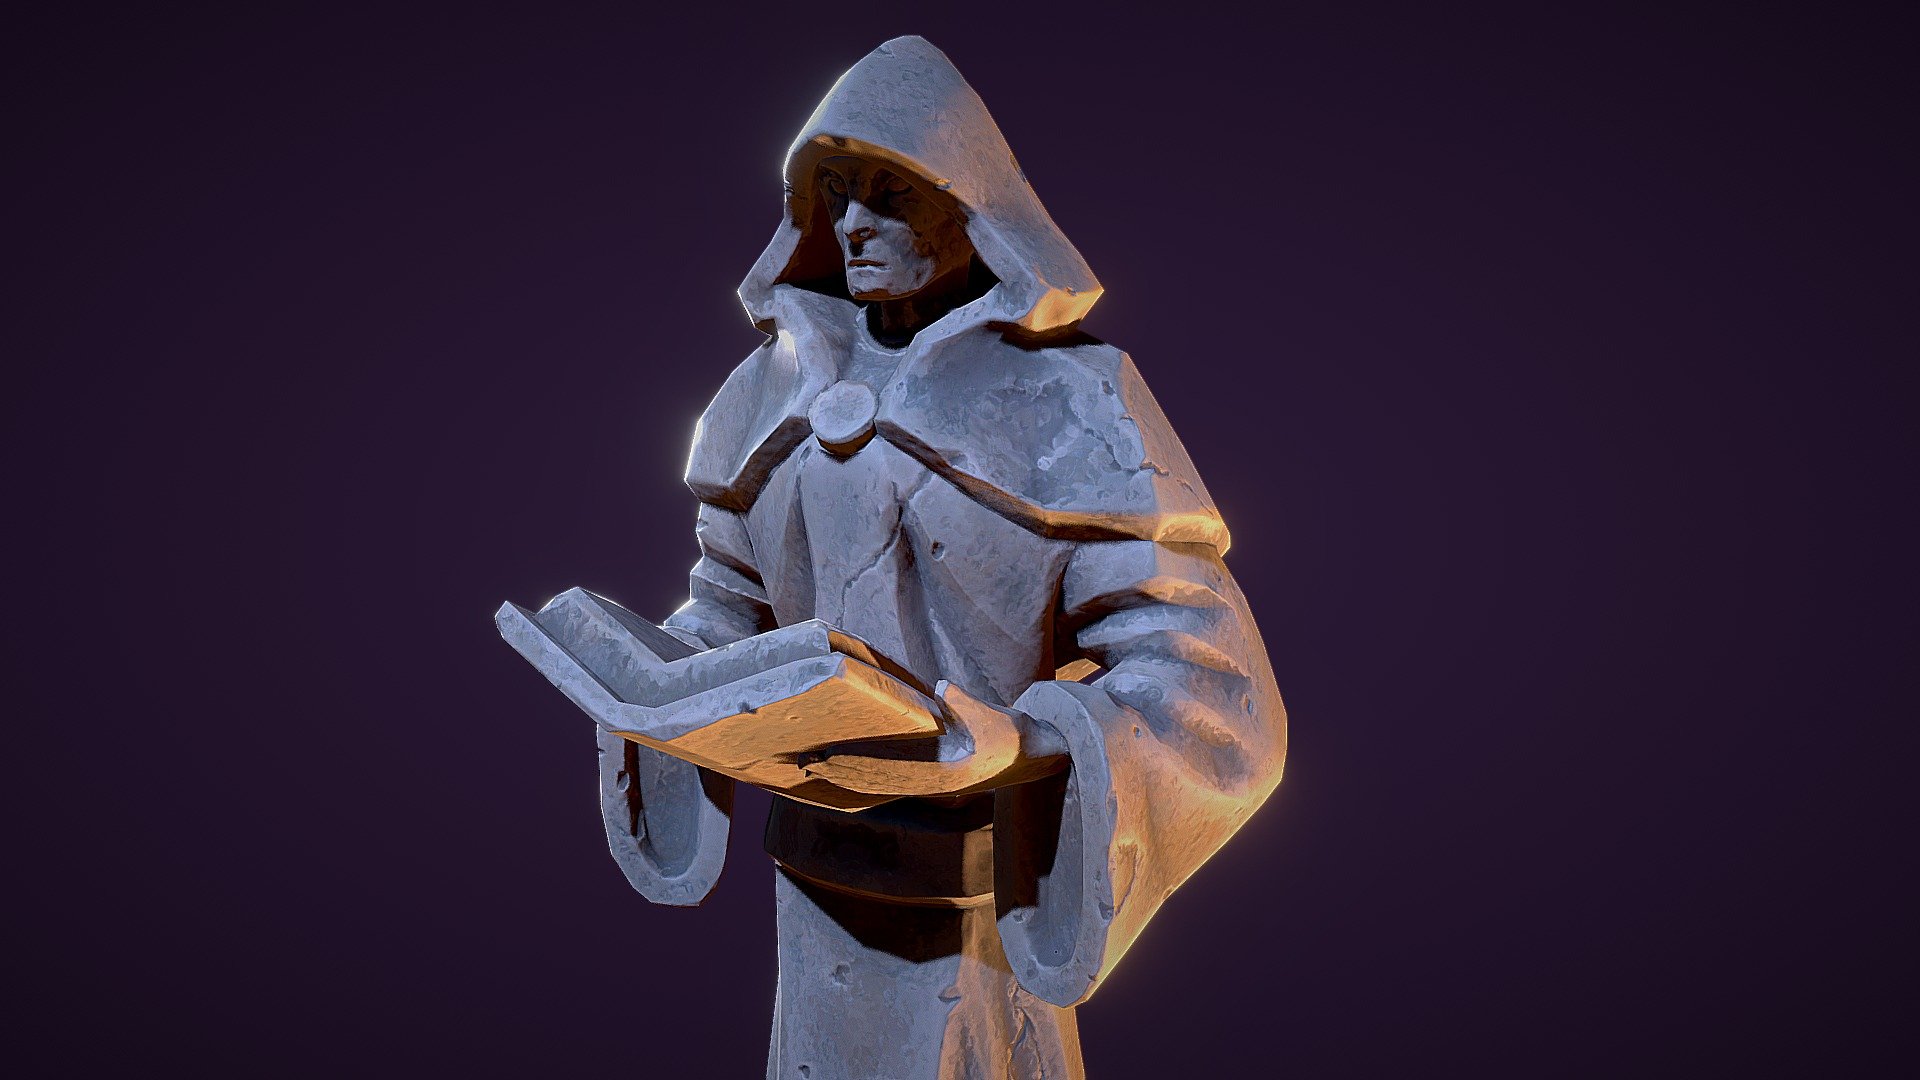 Stylized fantasy PBR statue for your project. Sculpted in ZBrush, retopology in Maya, texturing in Substance Painter.

Includes:
Lowpoly Mesh FBX / OBJ - UVed and game-ready
4k Texture Maps
Normal Map
Colour Map
Ambient Occlusion Map
Roughness Map

If you need custom made props like this one or want to find out more you can contact me on ignasgraphics@gmail.com - PBR Stylized Statue - Mage / Wizard - 3D model by Ignas (@Ignas3D) 3d model